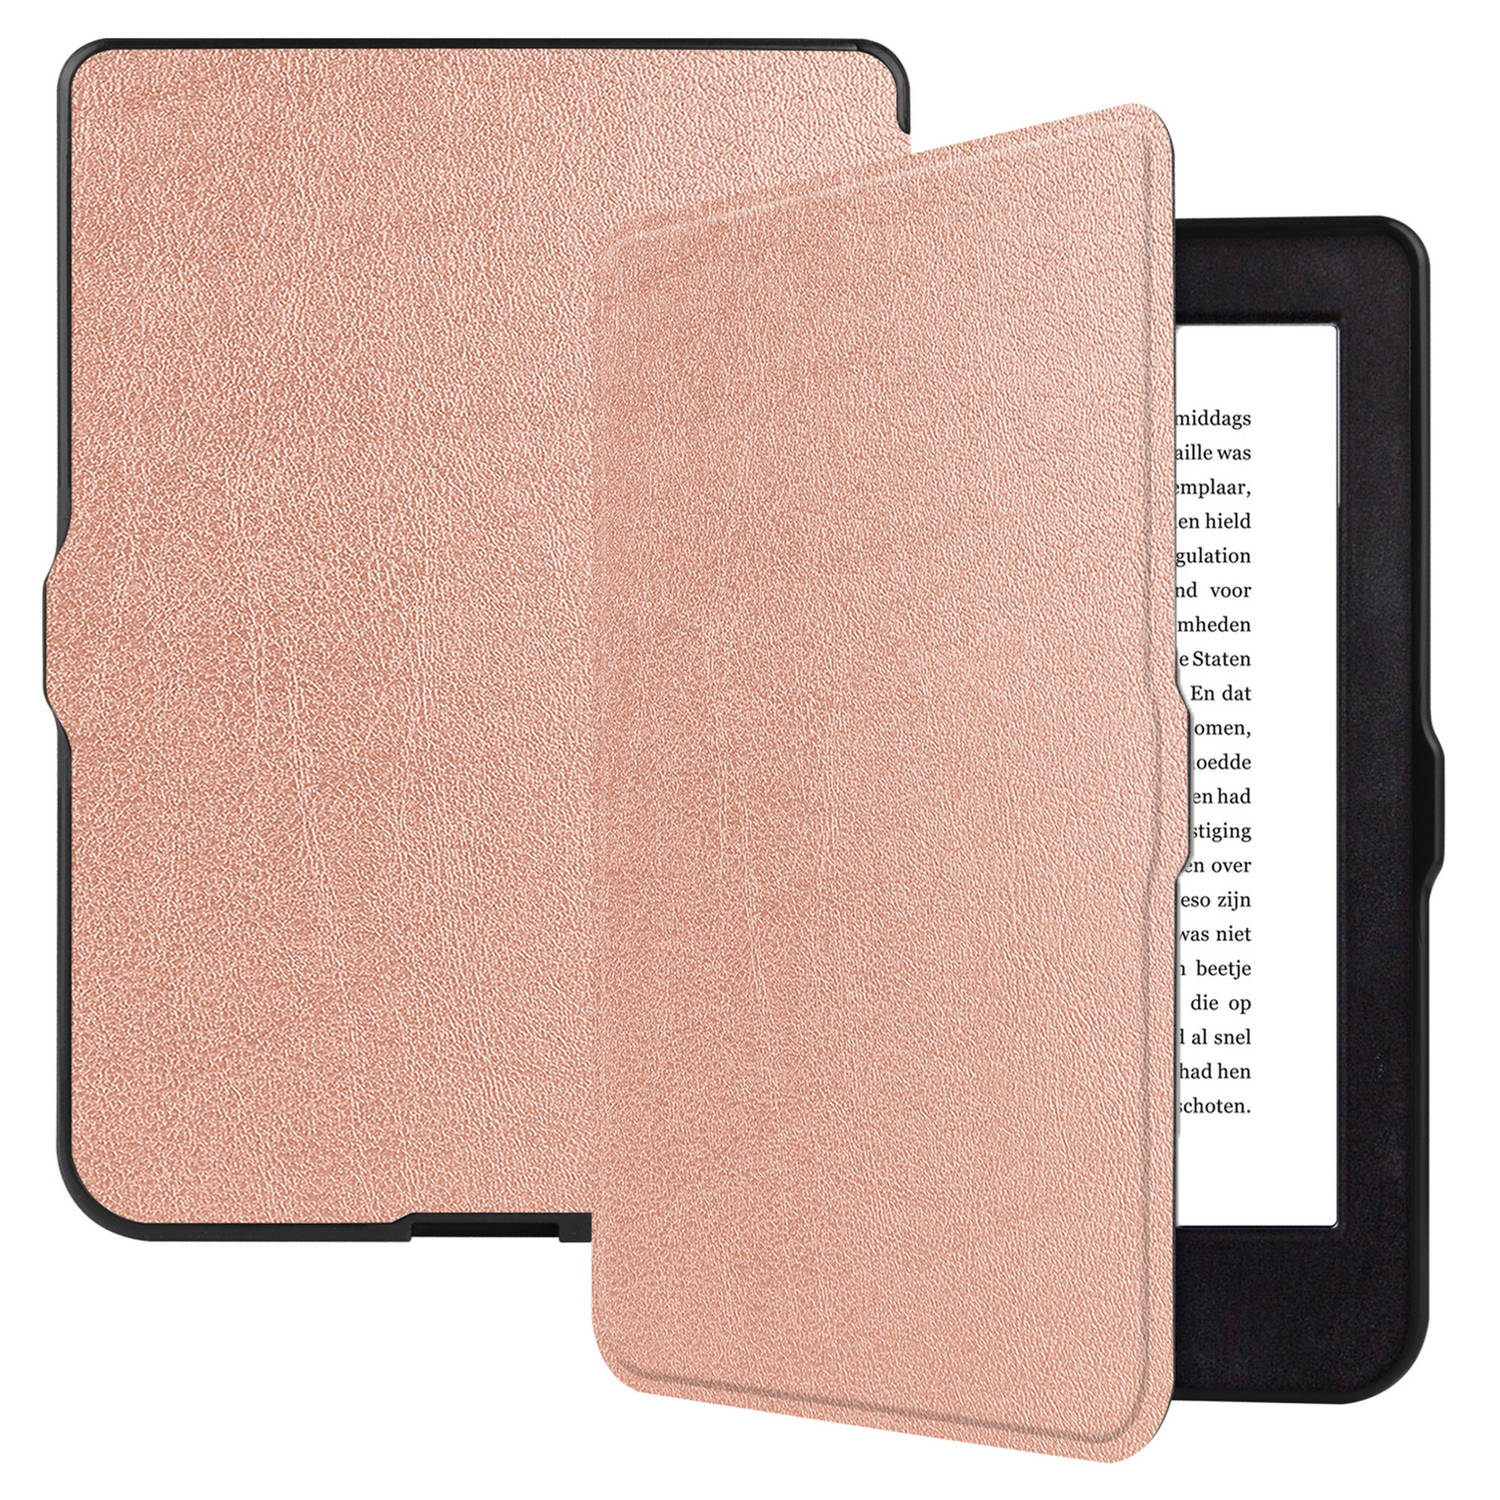 Basey Kobo Nia Hoesje Bookcase Cover Hoes Kobo Nia Case Cover Hoes Rosé Goud